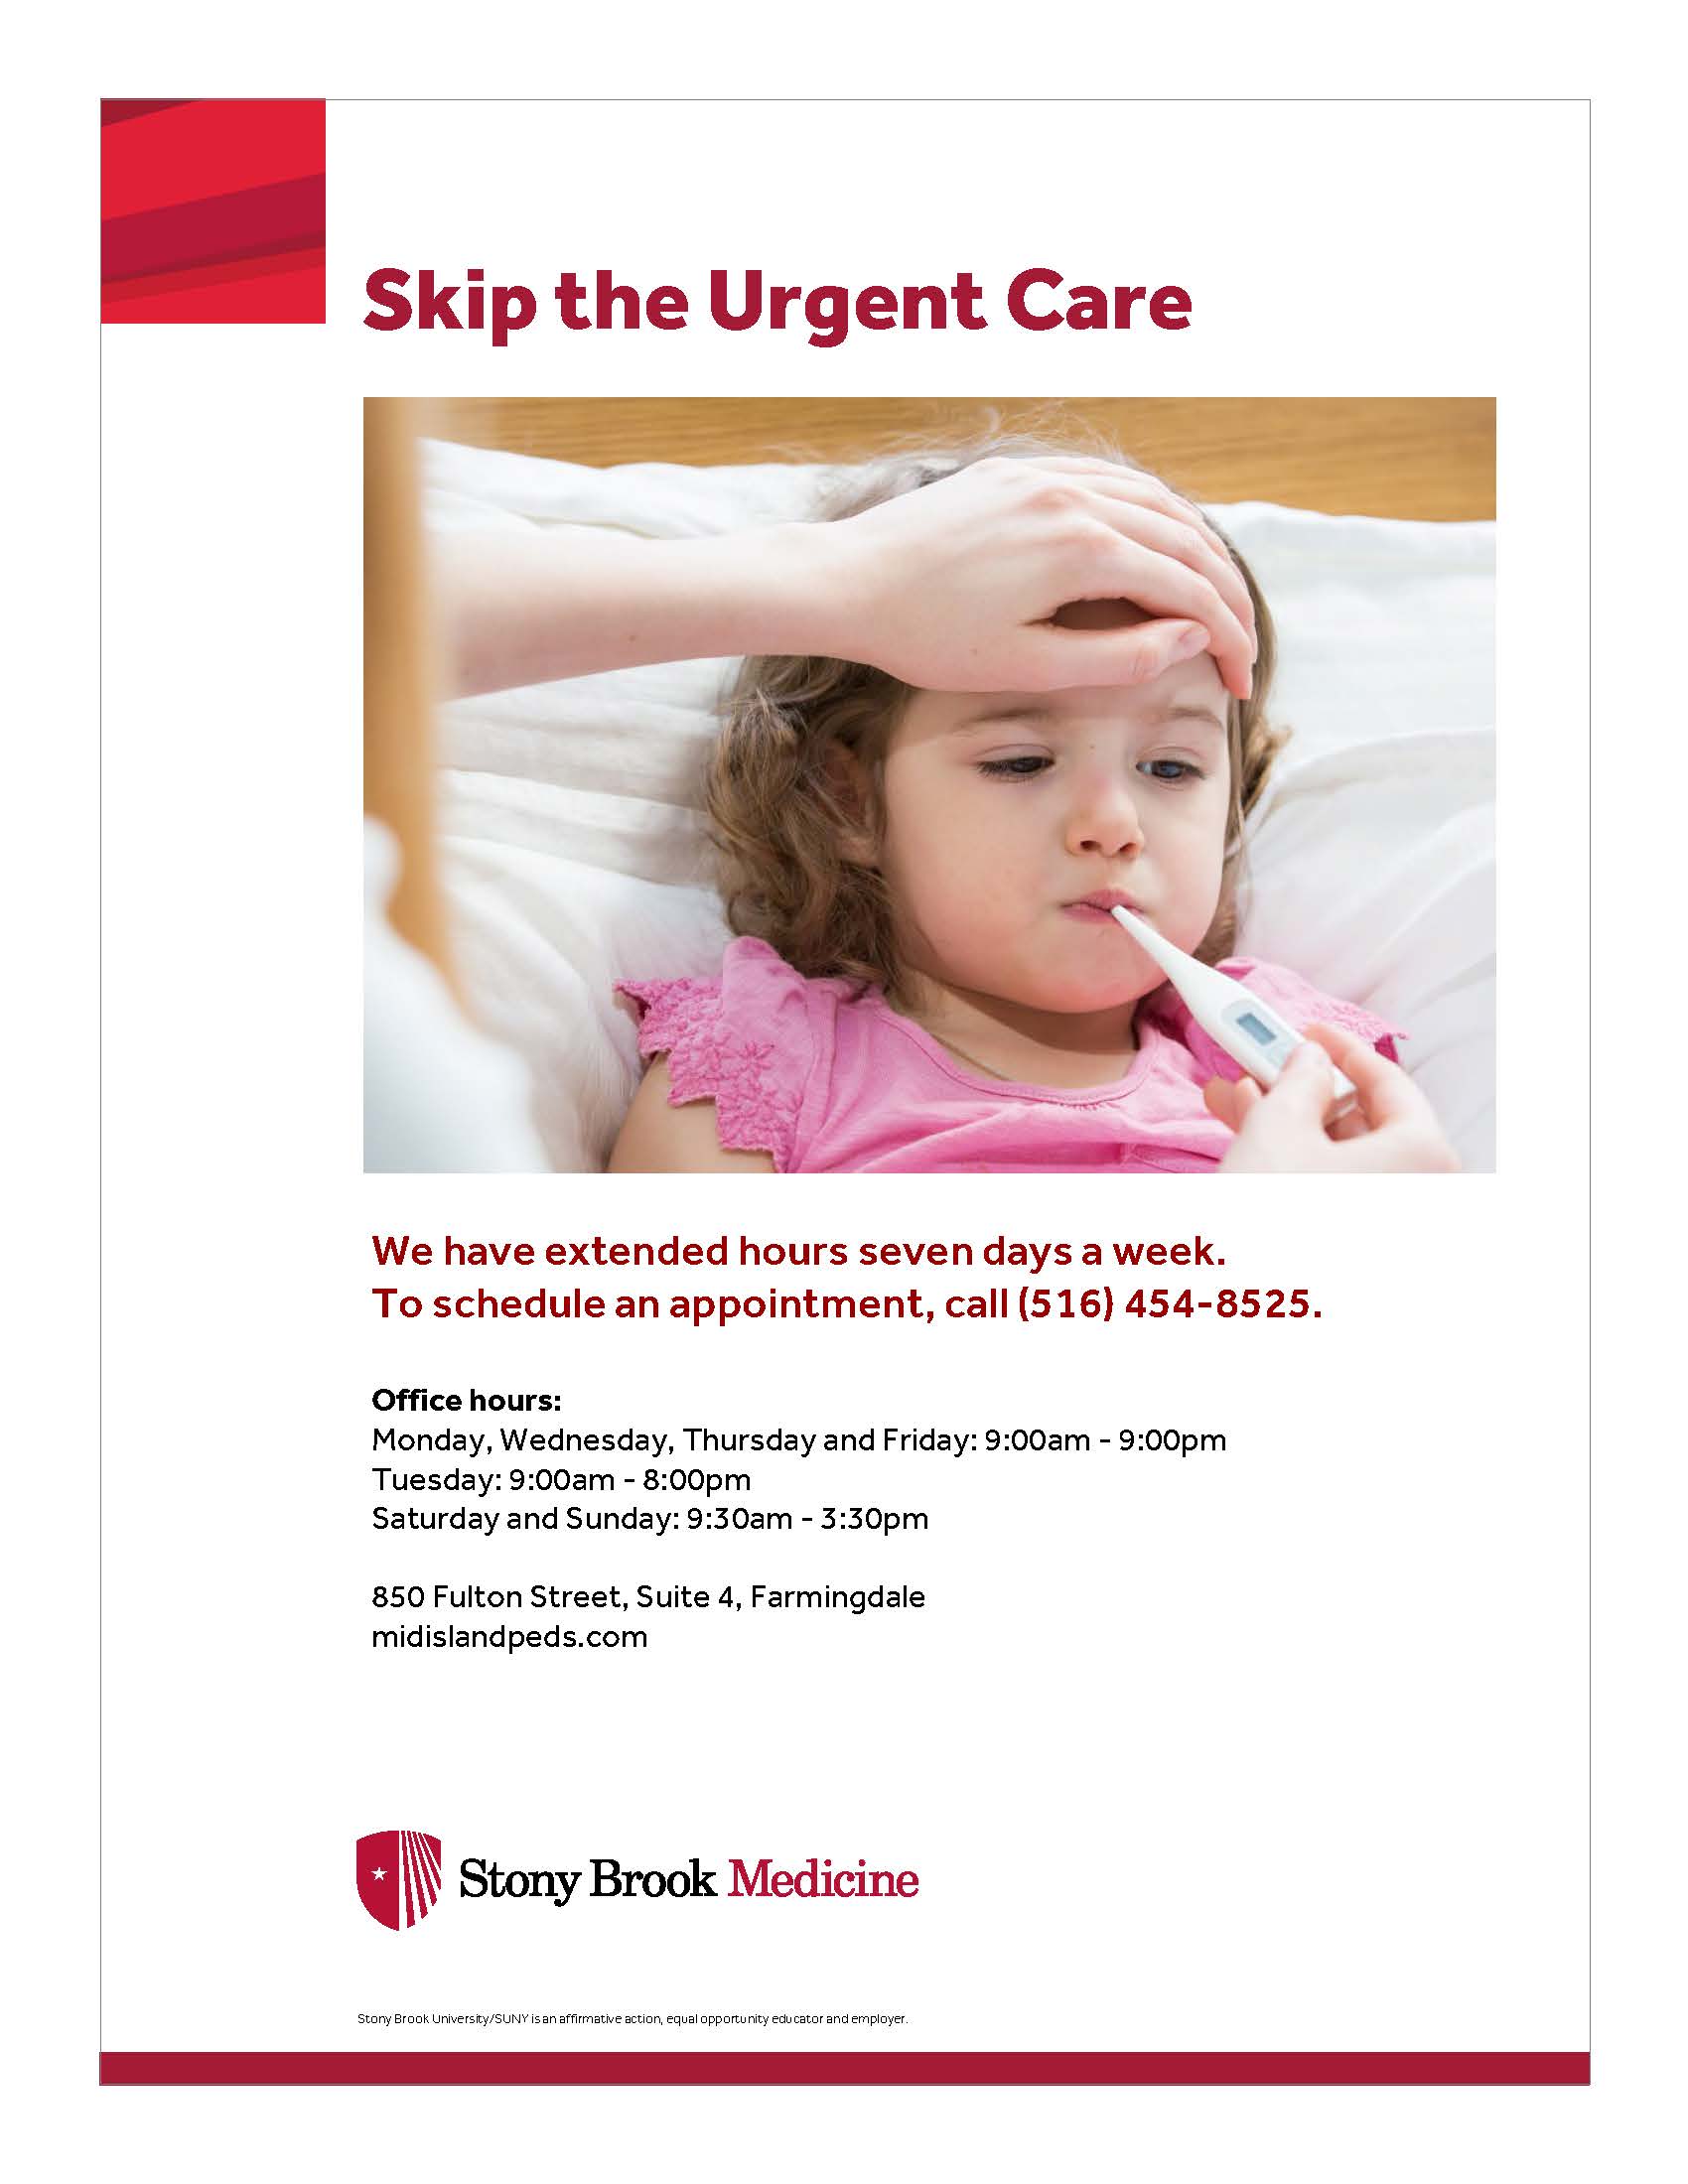 Skip the urgent care. We have extended hours seven days a week. To schedule an appointment, call (516) 454-8525. Office hours are Monday, Wednesday, Thursday and Friday from 9:00am-9:00pm. Tuesday from 9:00am-9:00pm. Saturday and Sunday from 9:30am-3:30pm. 850 Fulton Street, Suite 4, Farmingdale. Midislandpeds.com